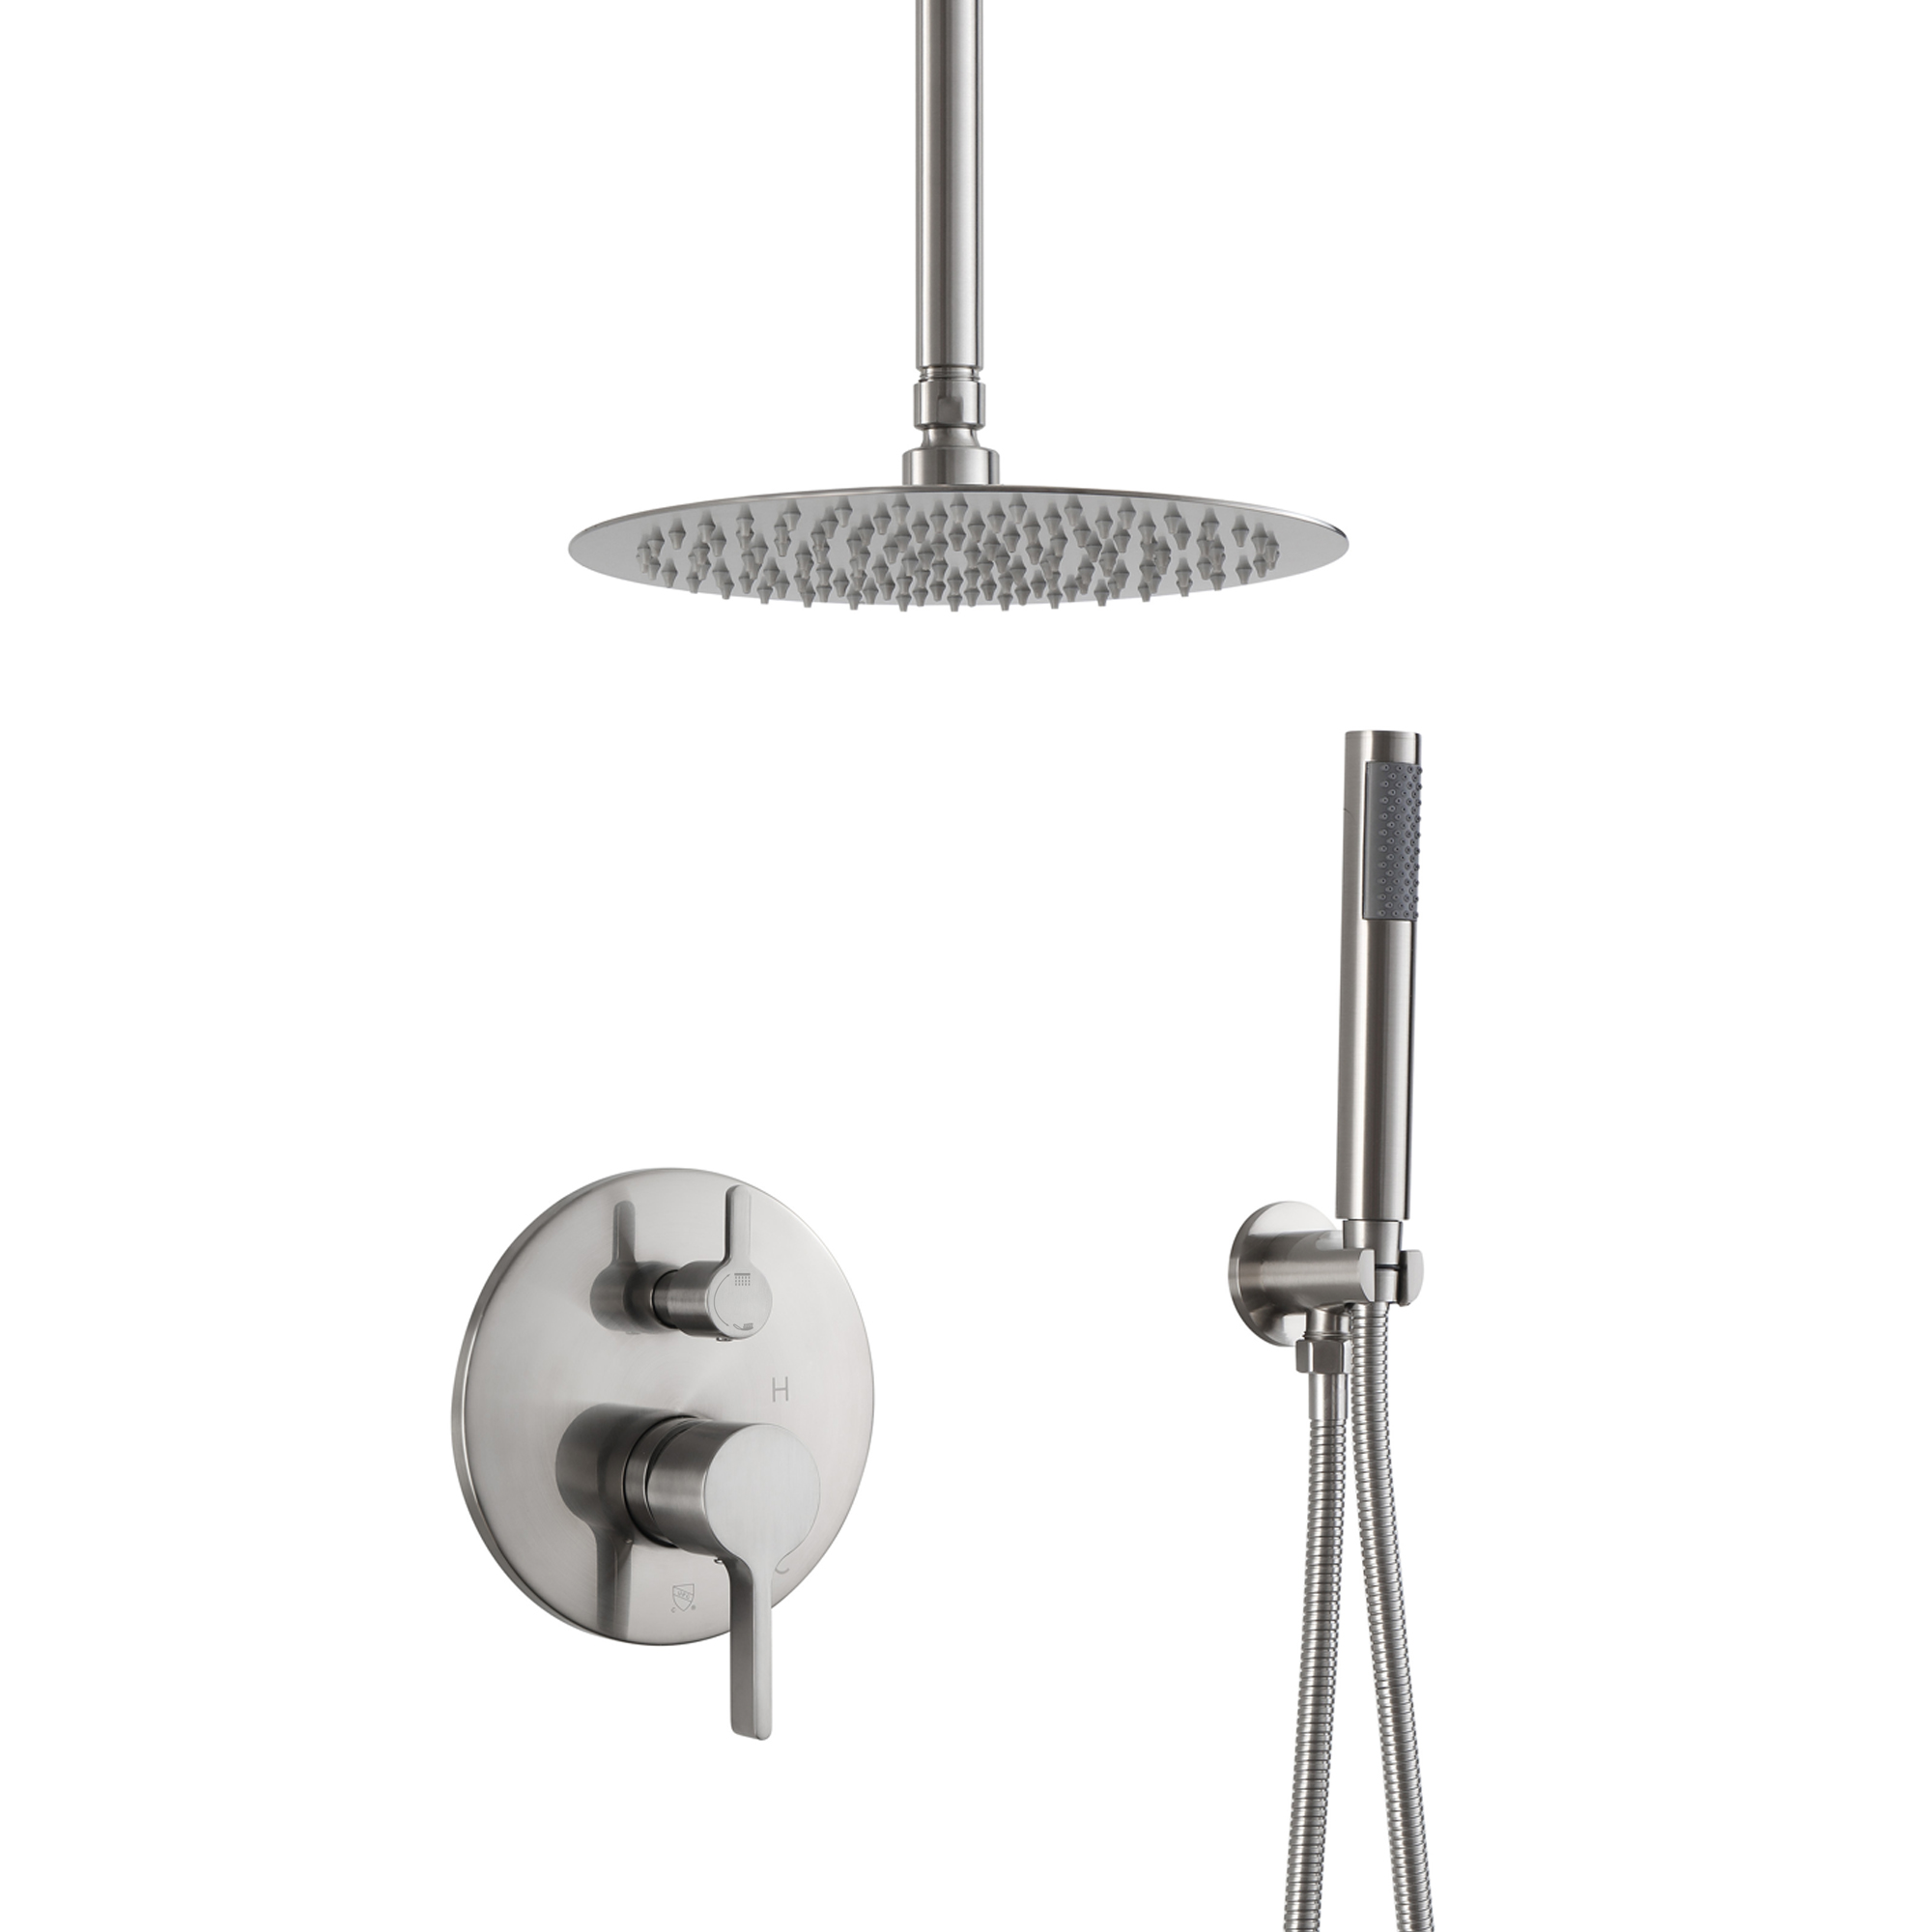 10 Inch Round Bathroom Shower Set Clearance Deal